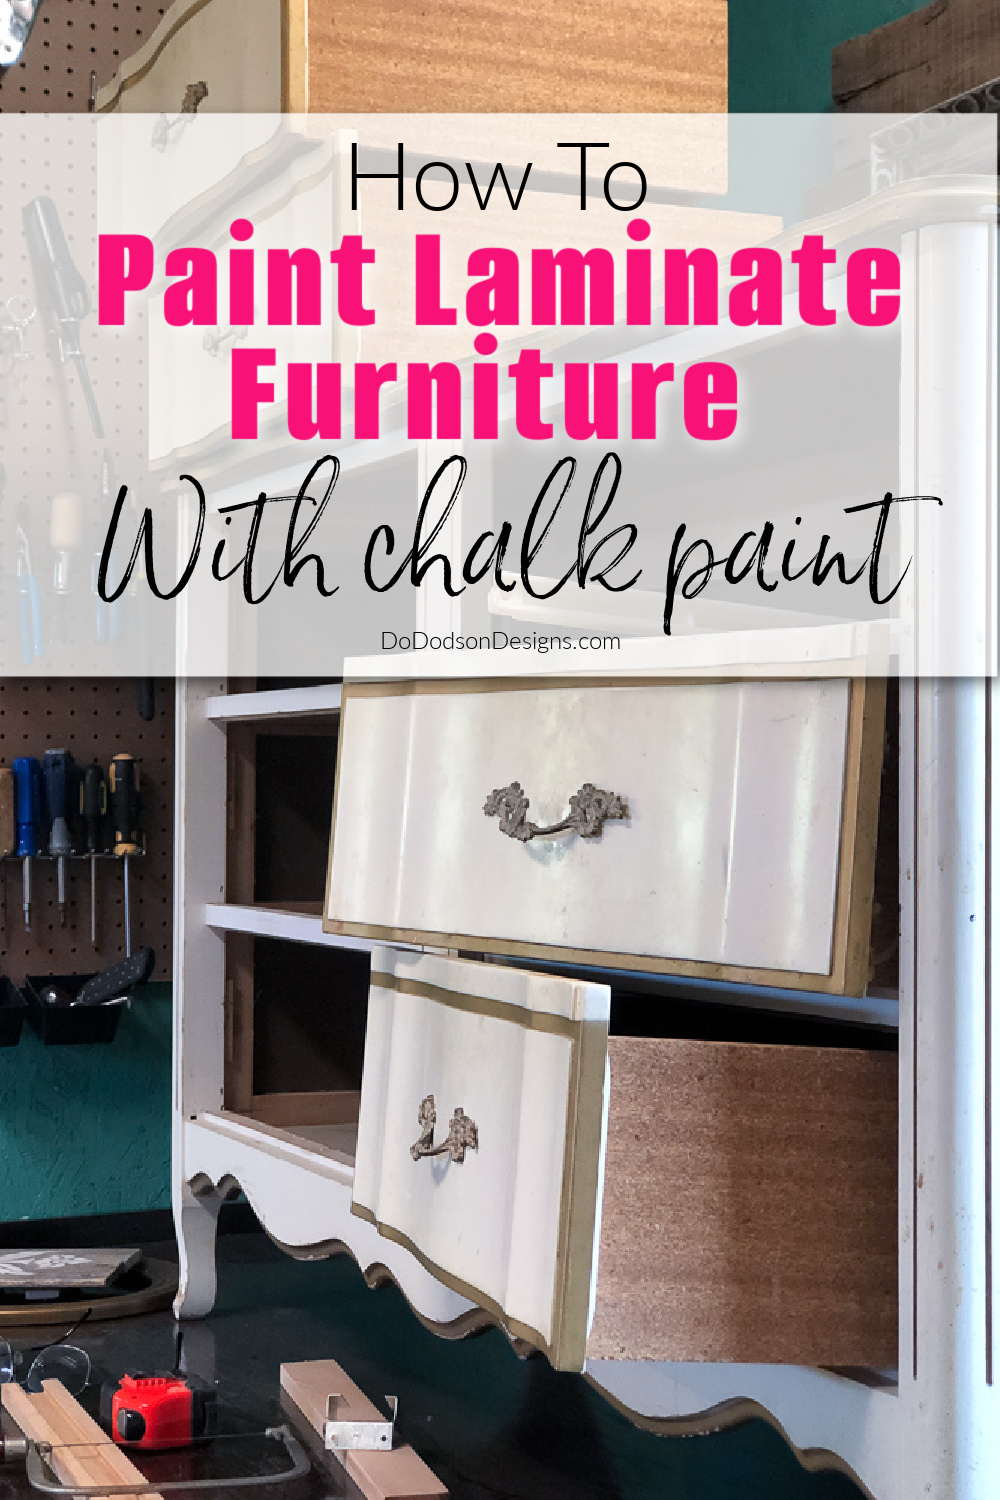 How To Paint Laminate Furniture With Chalk Paint | No Sanding Required